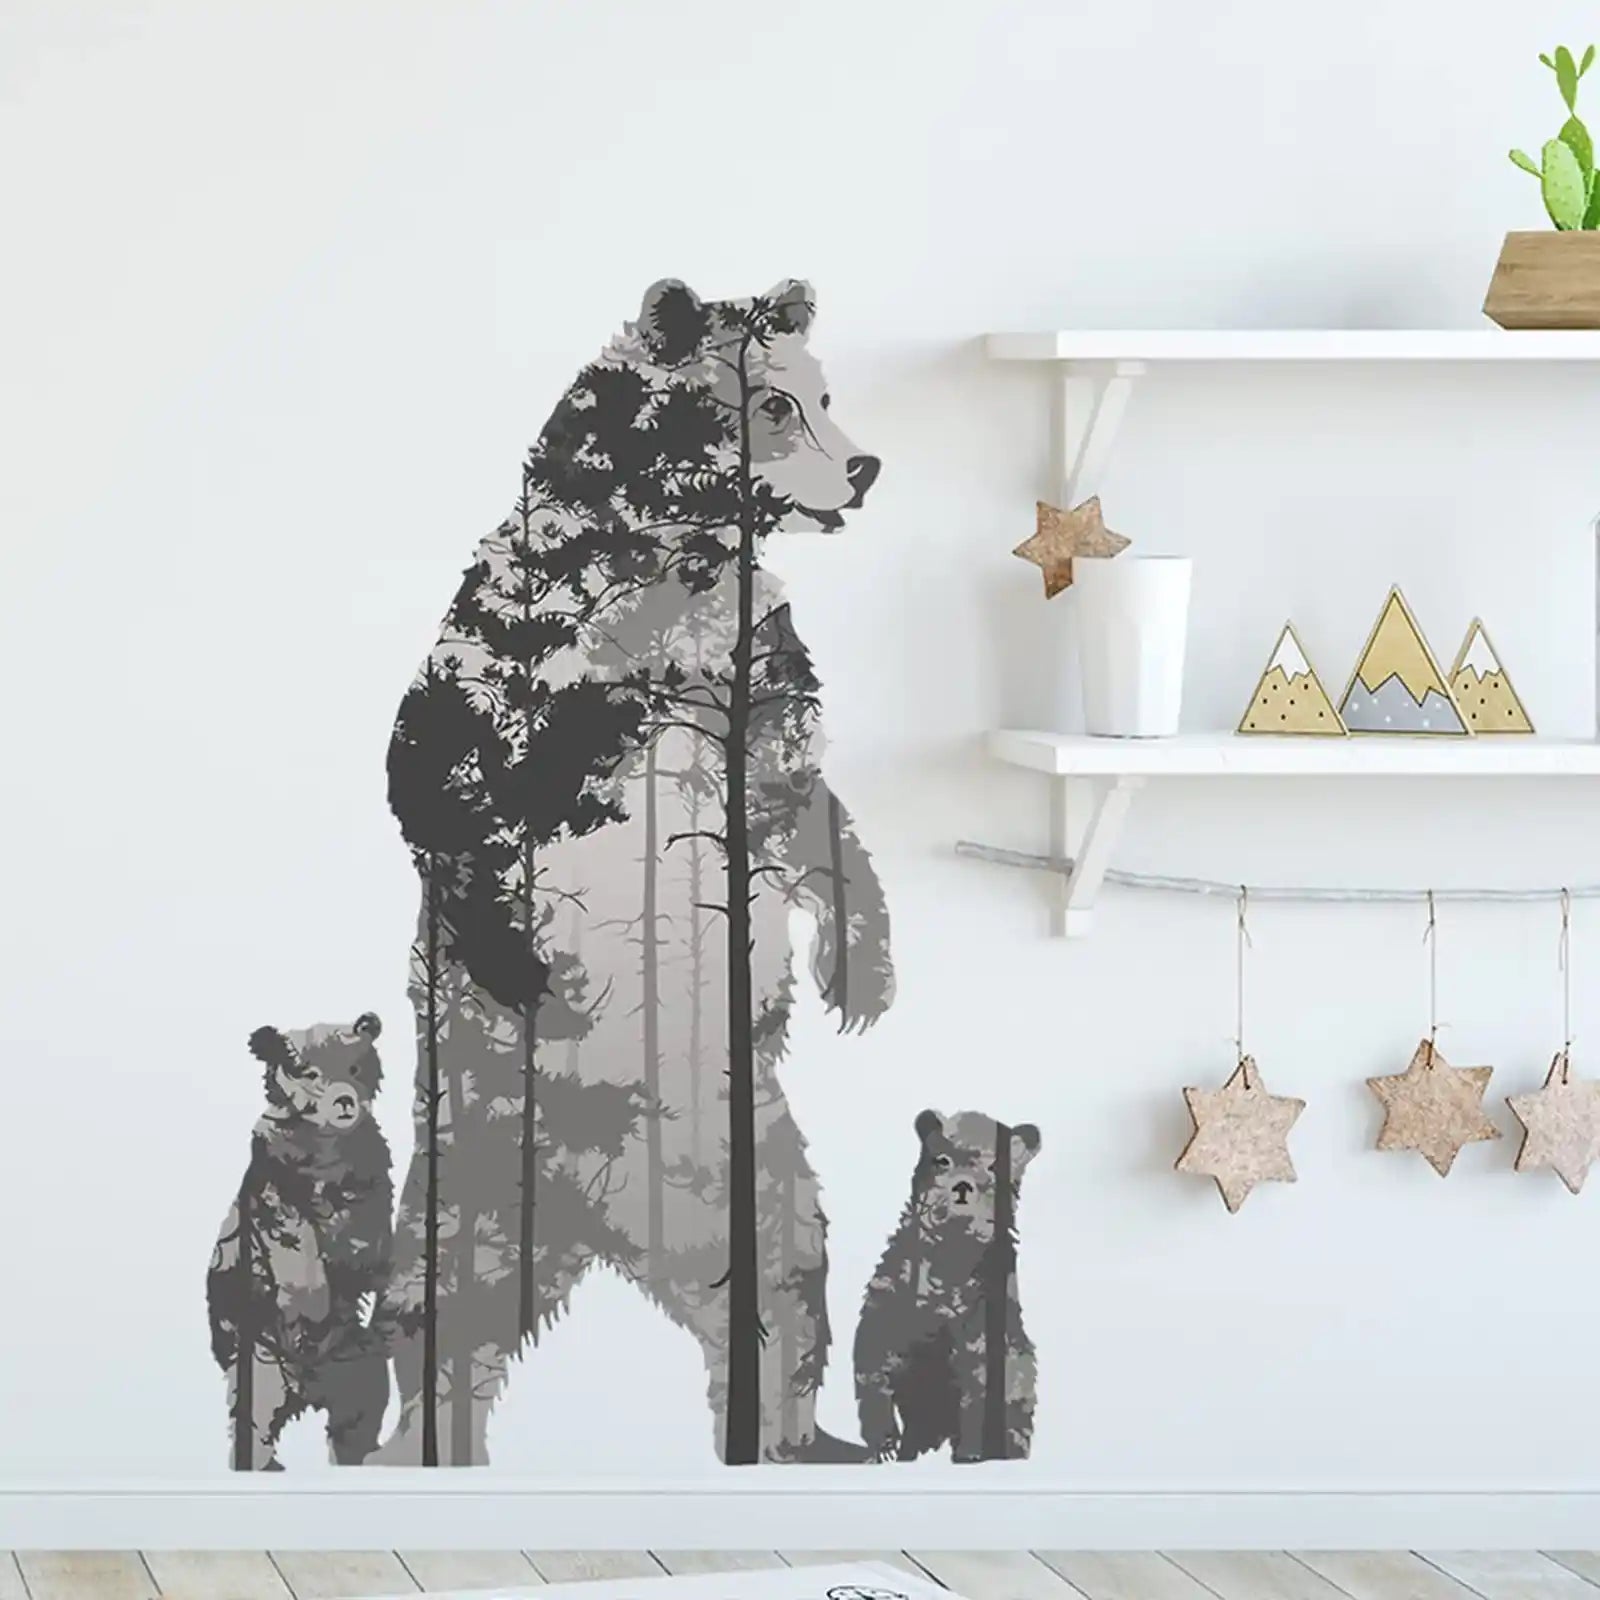 Polar Bear Wall Stickers Decor-Great for Room,Livingroom,Walls,Kitchen，Bedroom and More, Wall Stickers Decals